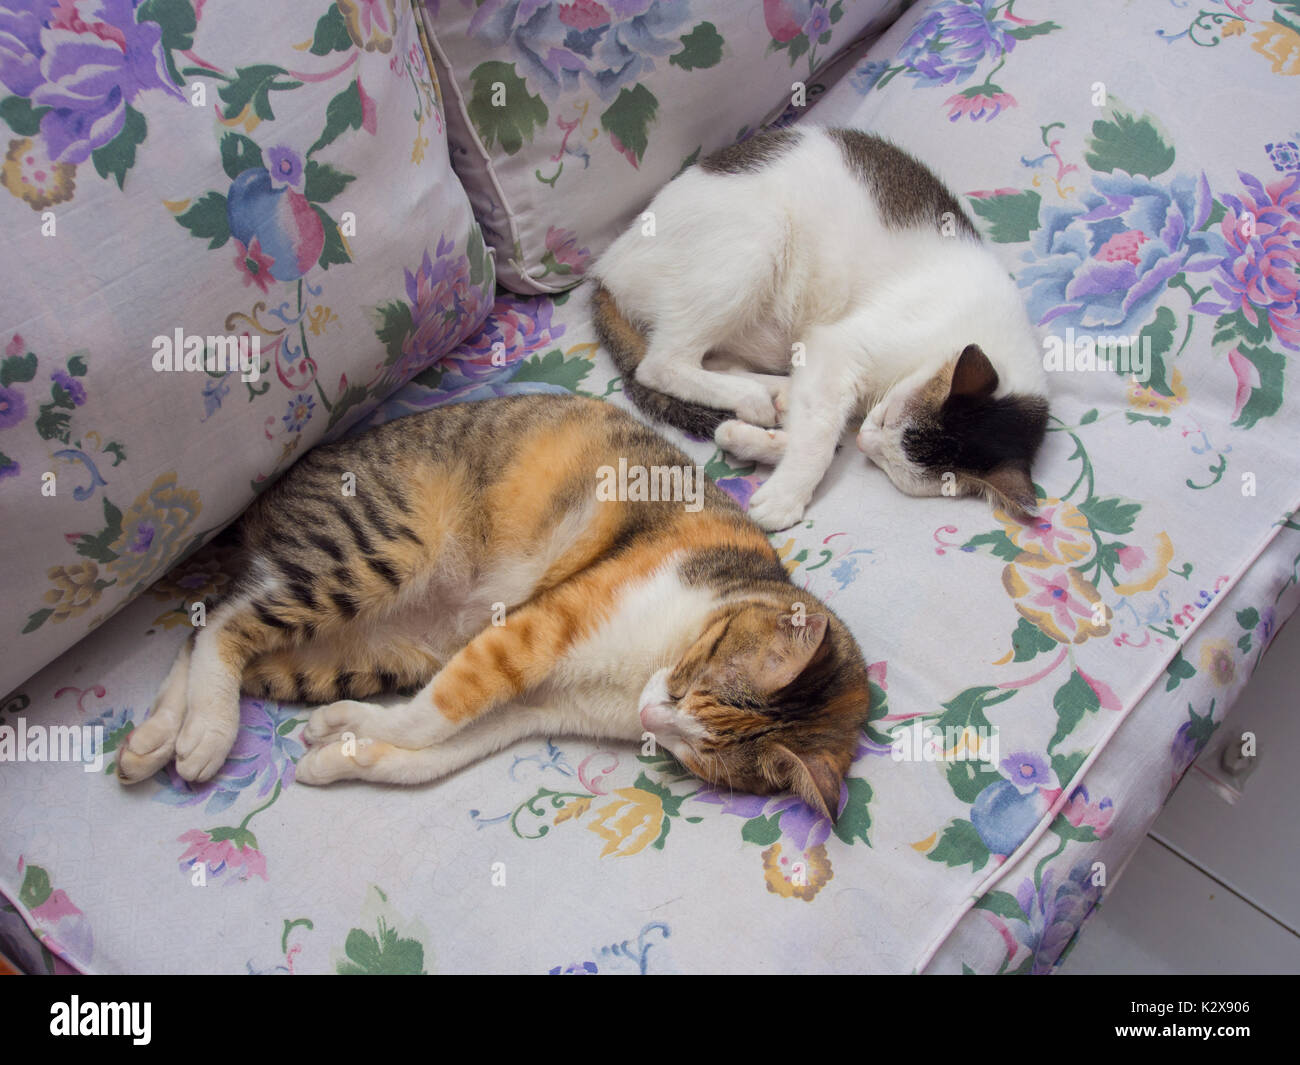 Two Cats Sleeping Together on Seat Cushion Stock Photo